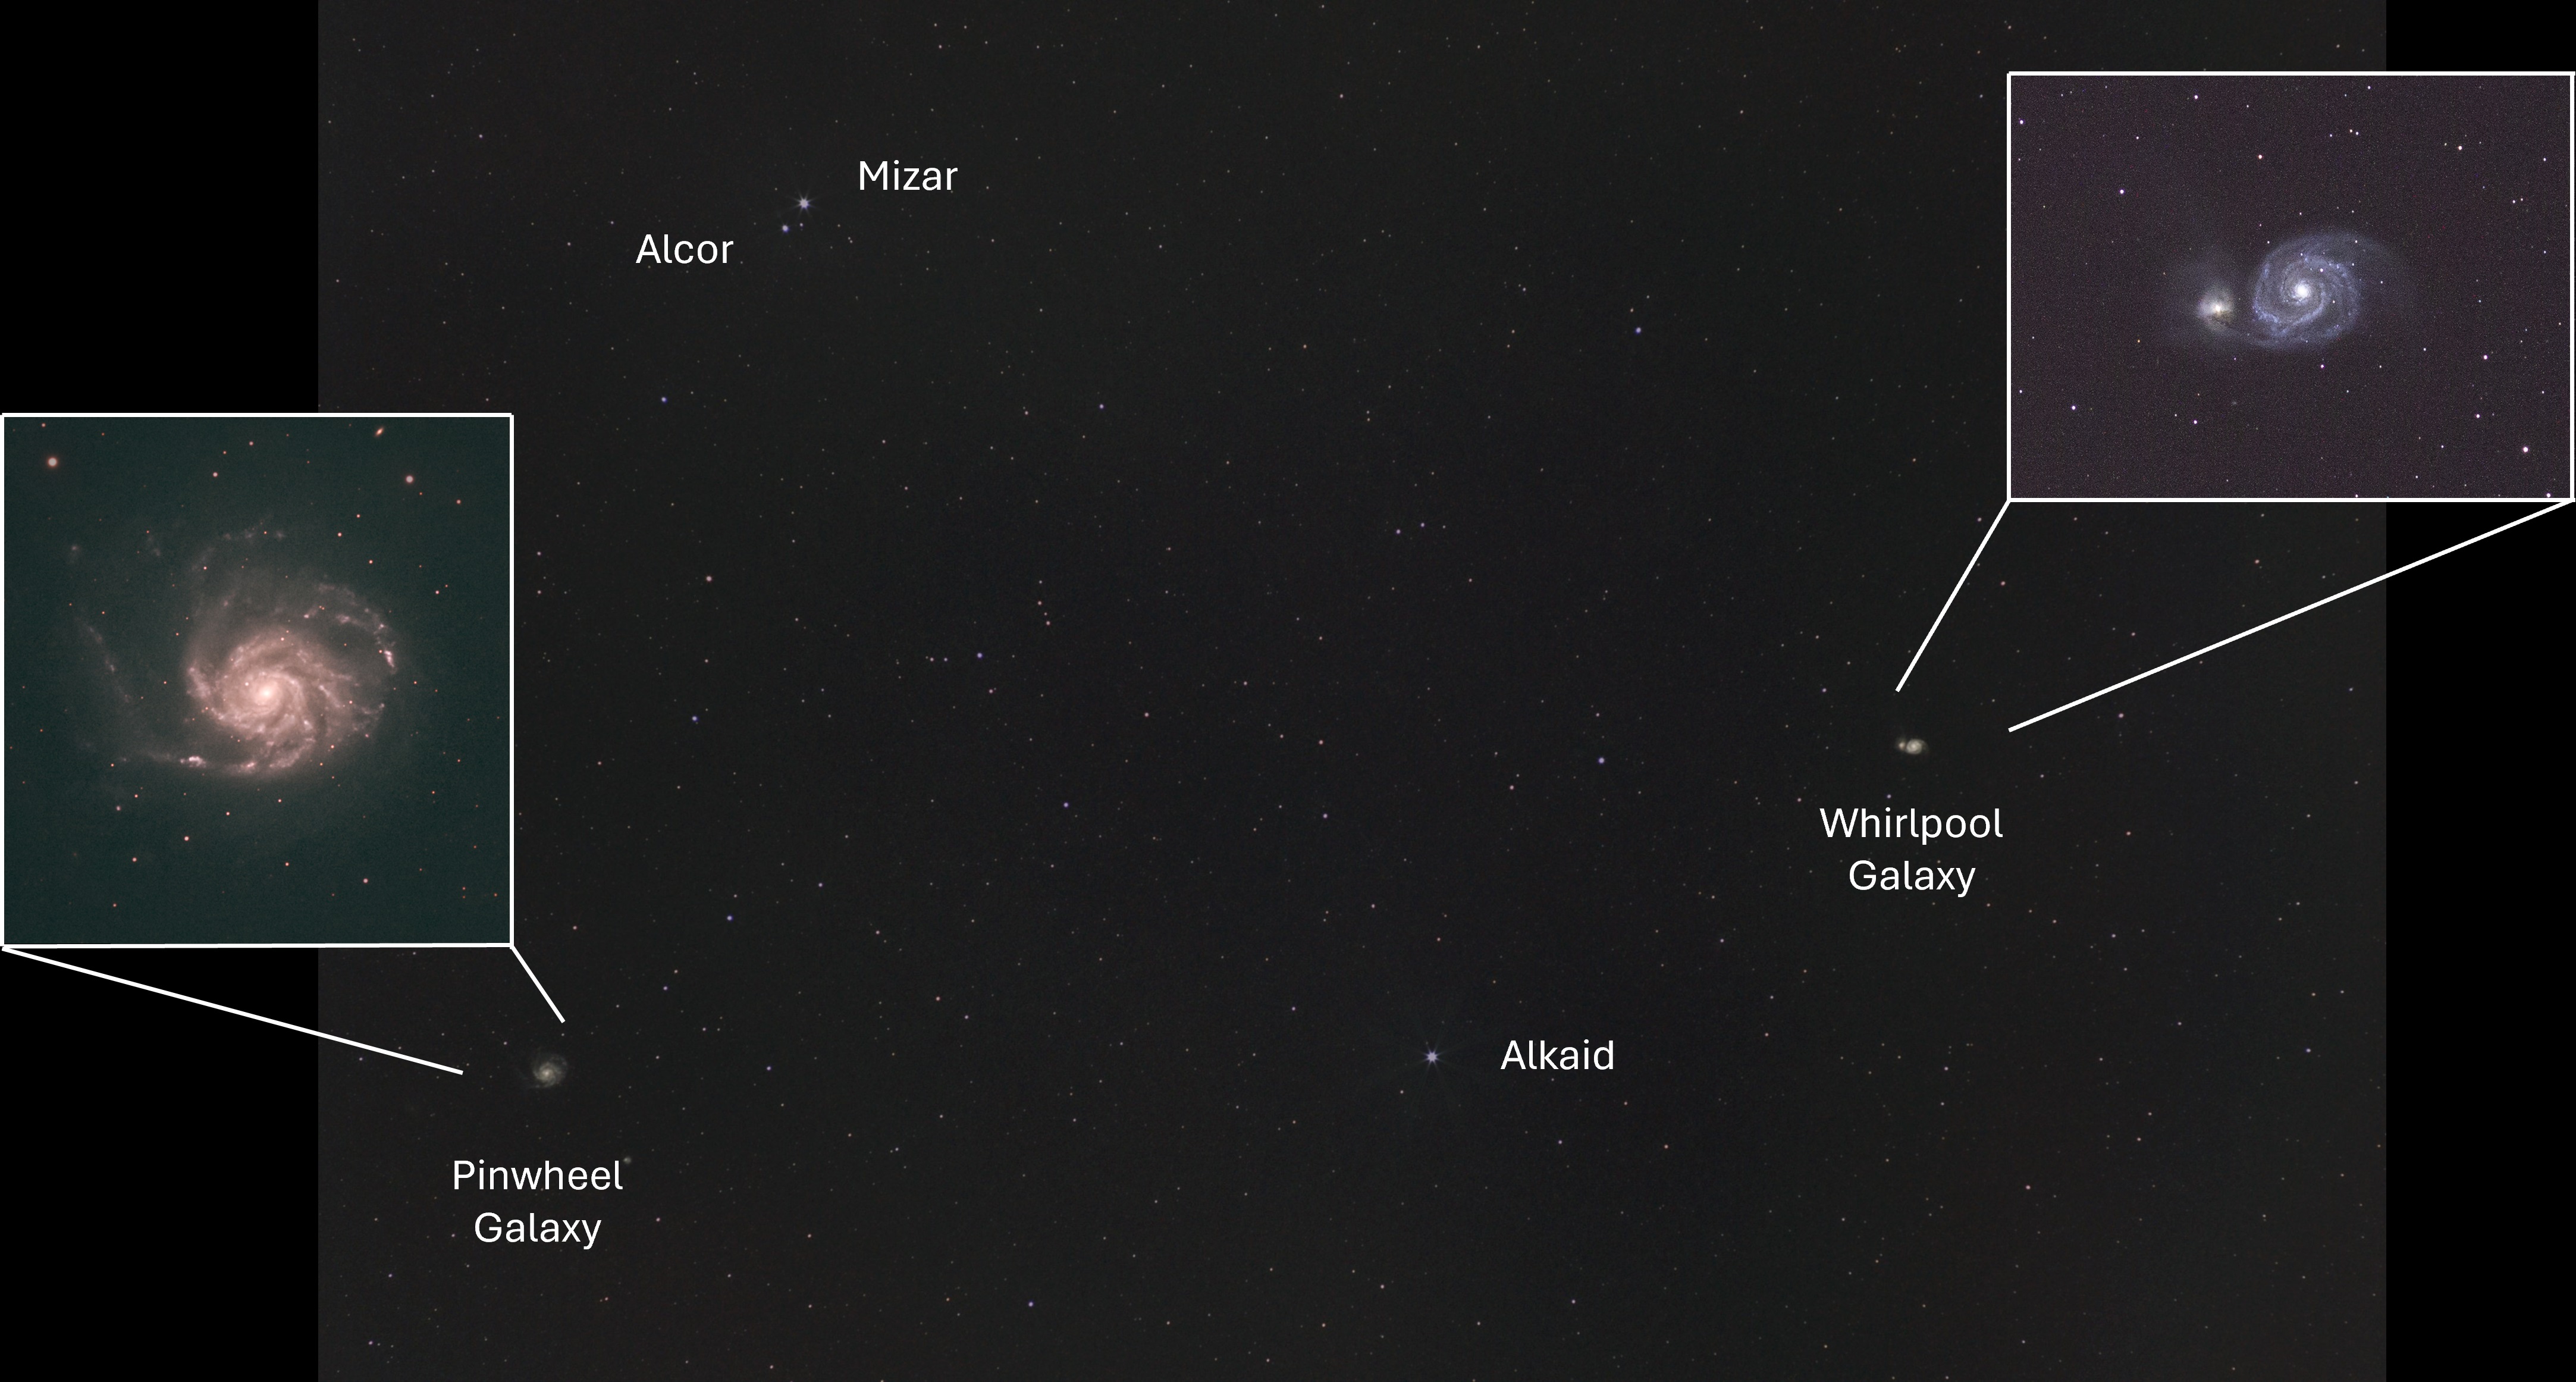 The tail of spring constellation Ursa Major (the Great Bear), showing the star Alkaid, double star Mizar and Alcor and the Whirlpool and Pinwheel galaxies. The stars are labelled on the star map below to help you locate them. The photos of the Pinwheel Galaxy (left) and Whirlpool Galaxy (right) were taken with a DSLR camera and a small refractor telescope. Credit: Derek Smale